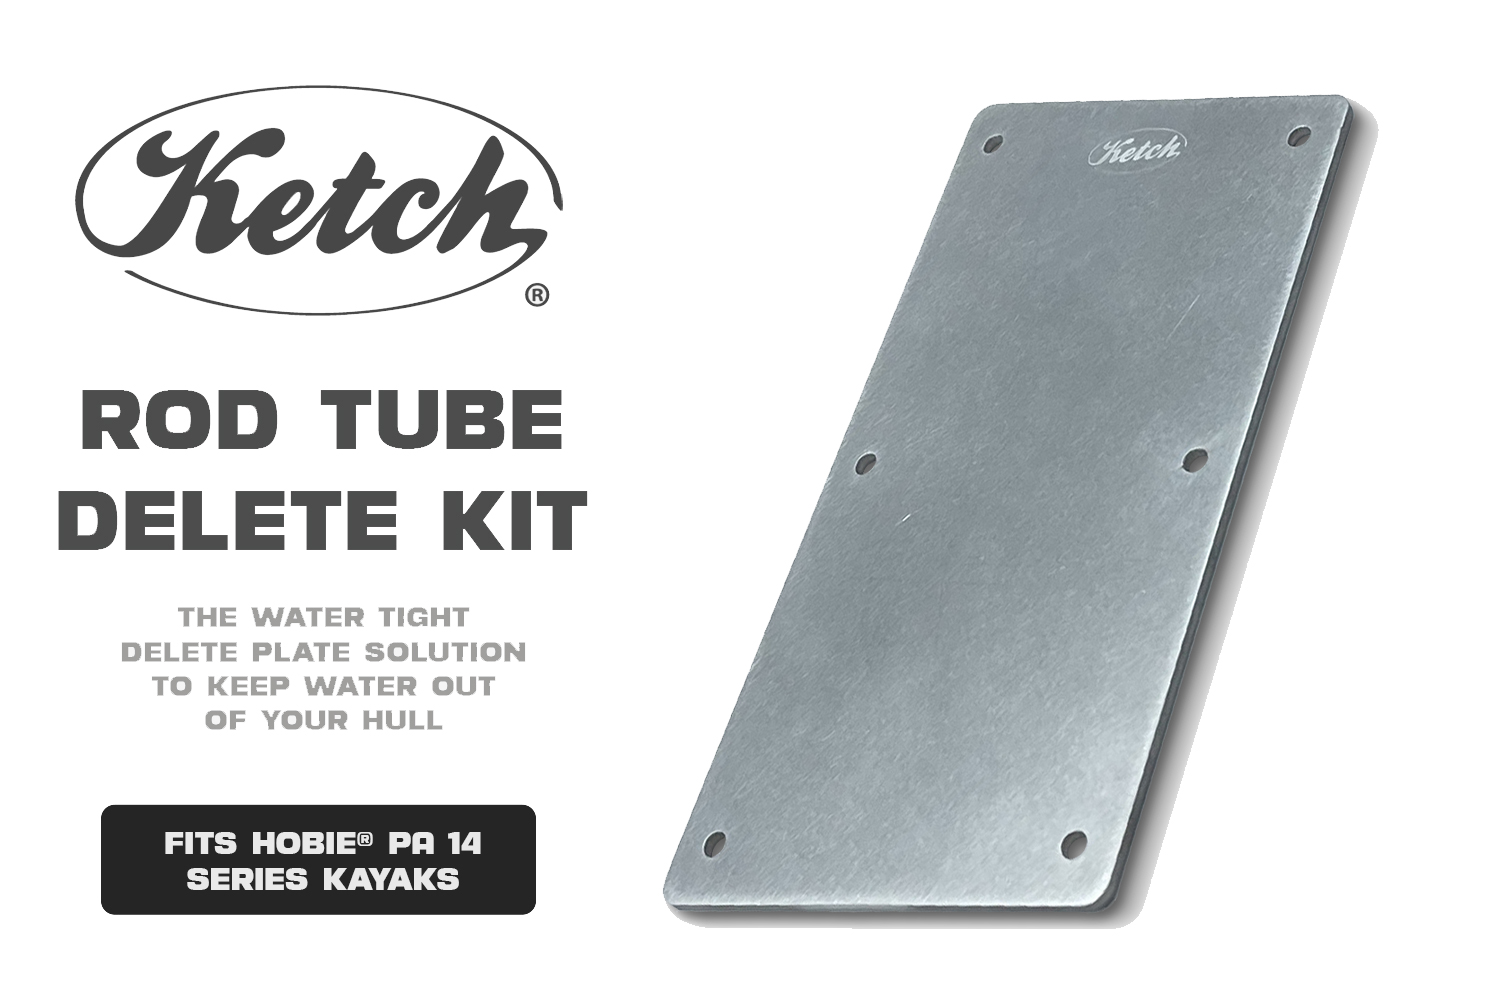 Ketch Rod Tube Delete Plate – Ketch Products